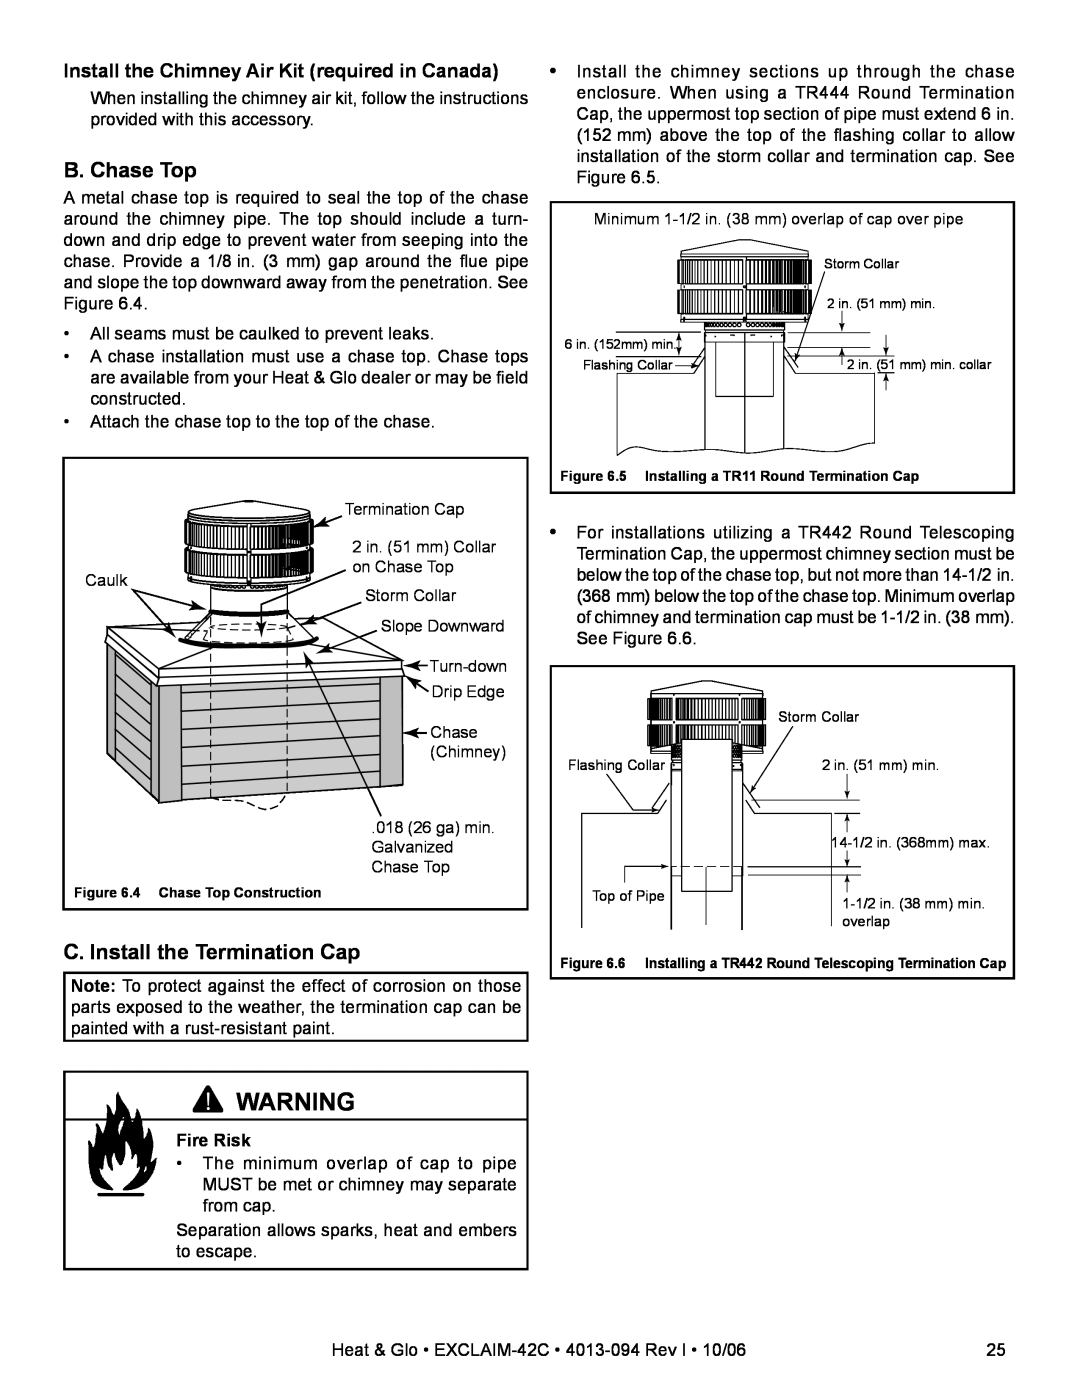 Heat & Glo LifeStyle EXCLAIM-42T-C, EXCLAIM-42H-C owner manual B. Chase Top, C. Install the Termination Cap, Fire Risk 